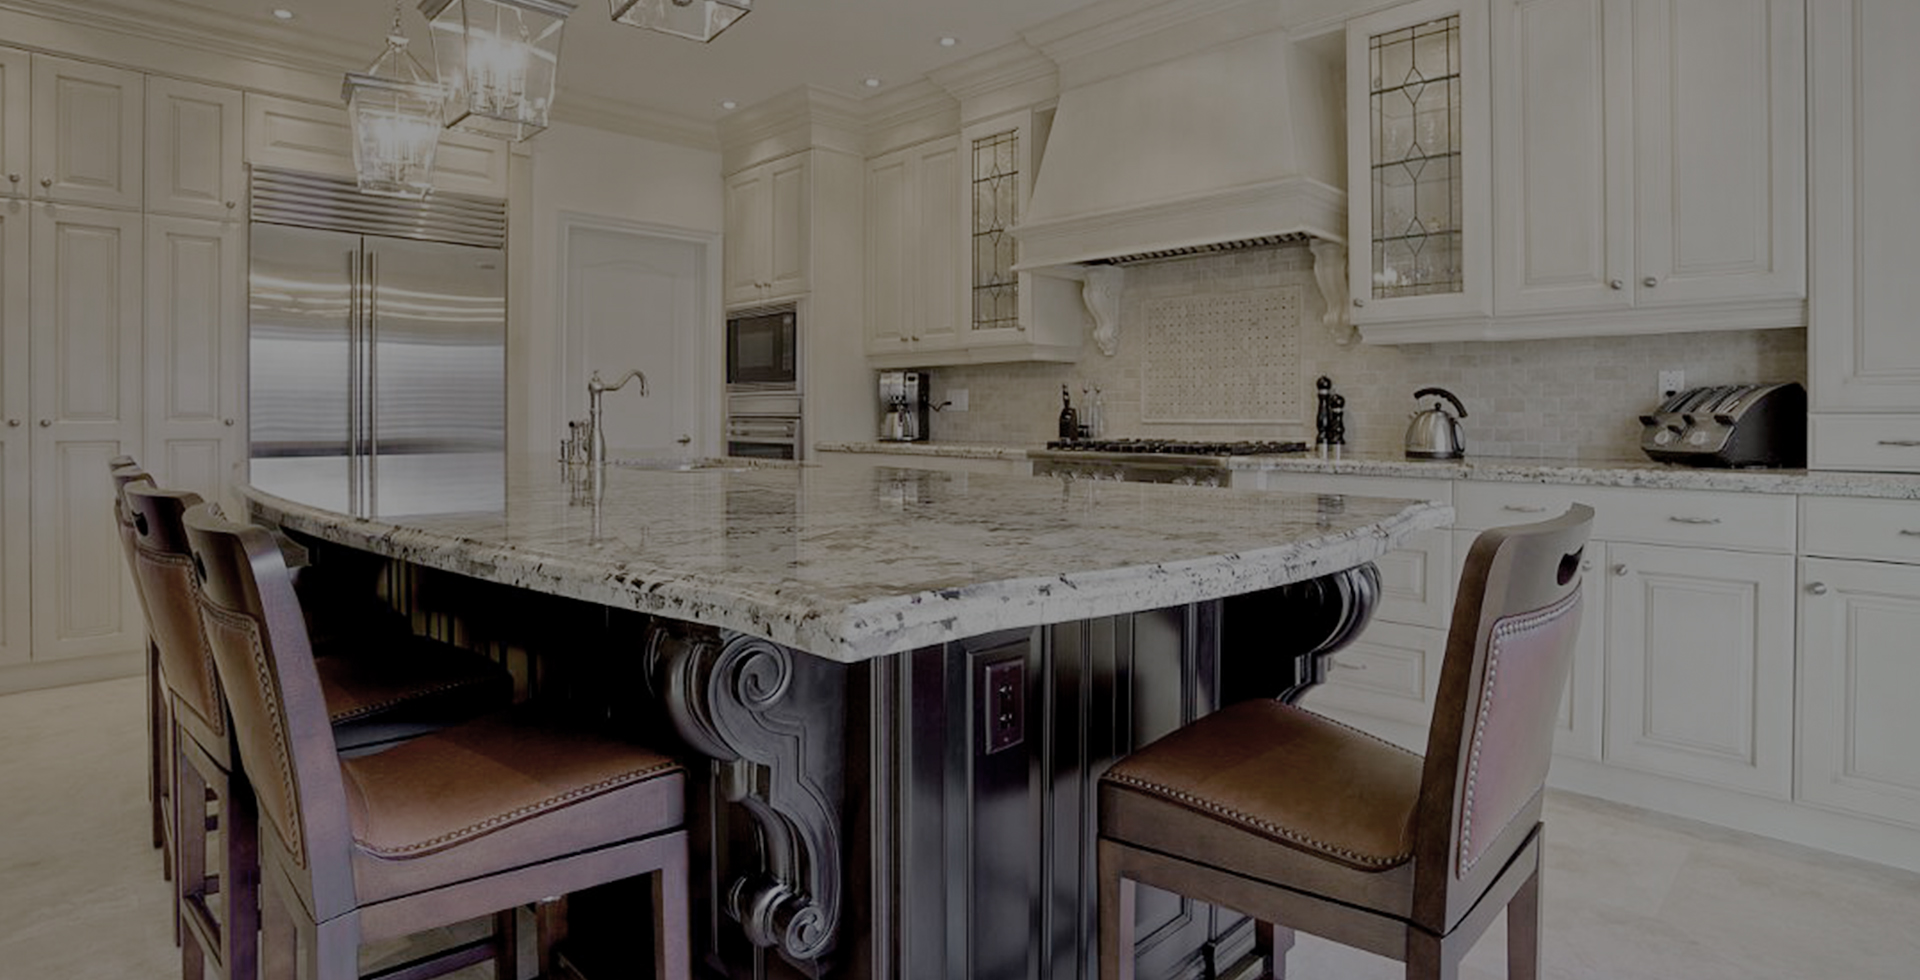 A modern kitchen with white shaker cabinets and a fancy marble island in the middle with chairs.